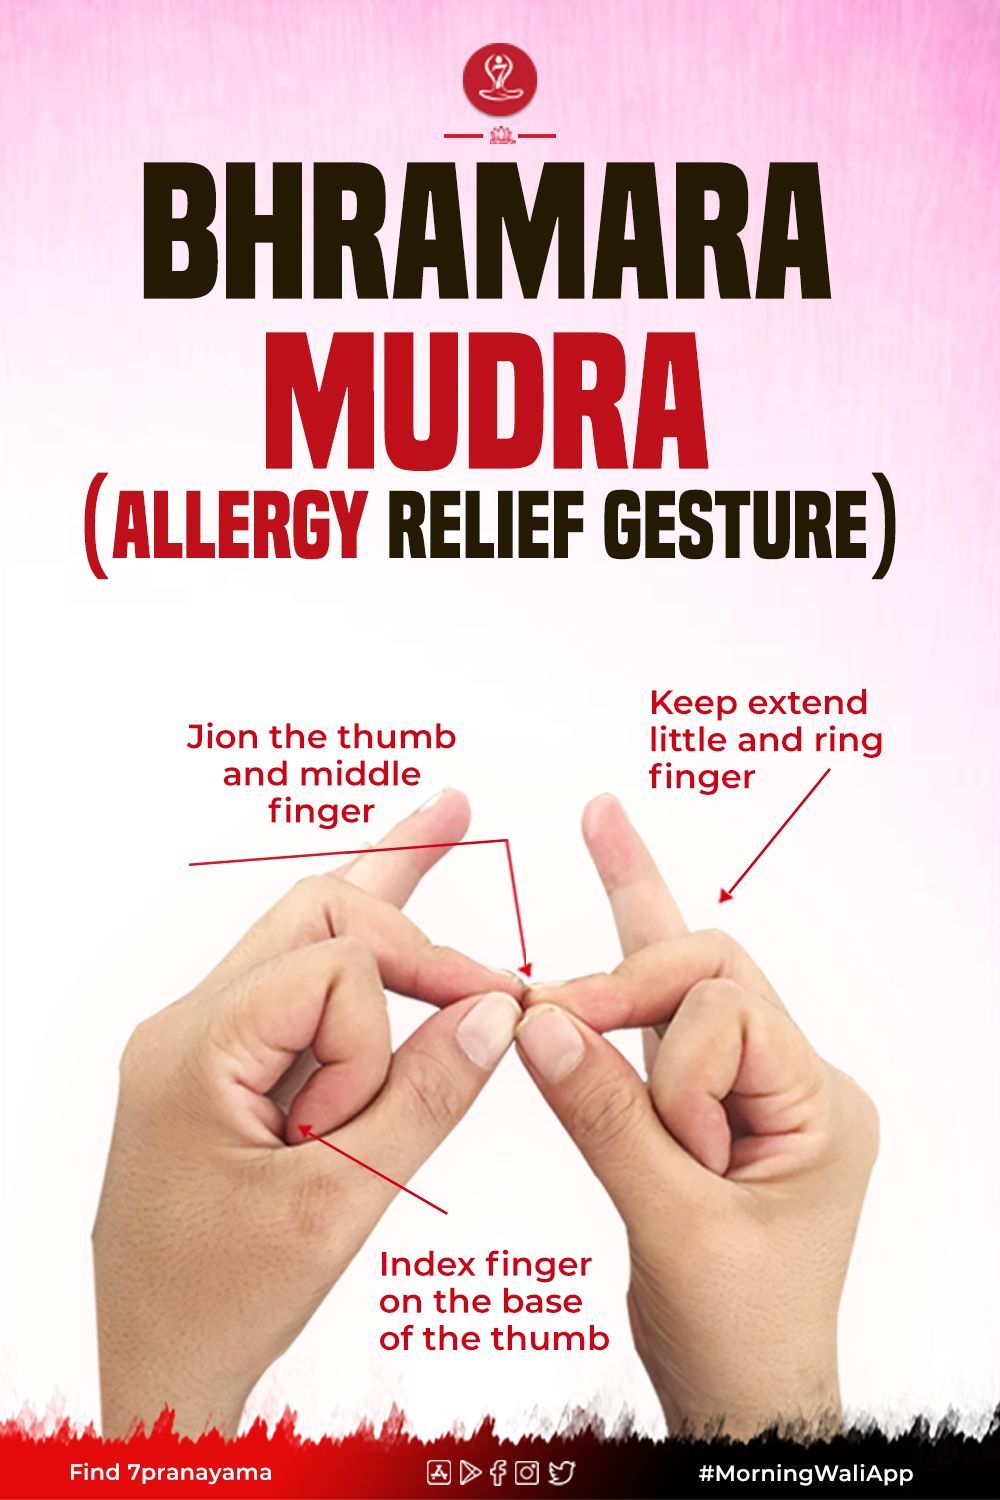 How to do Bhramara Mudra and What are Its benefits? -